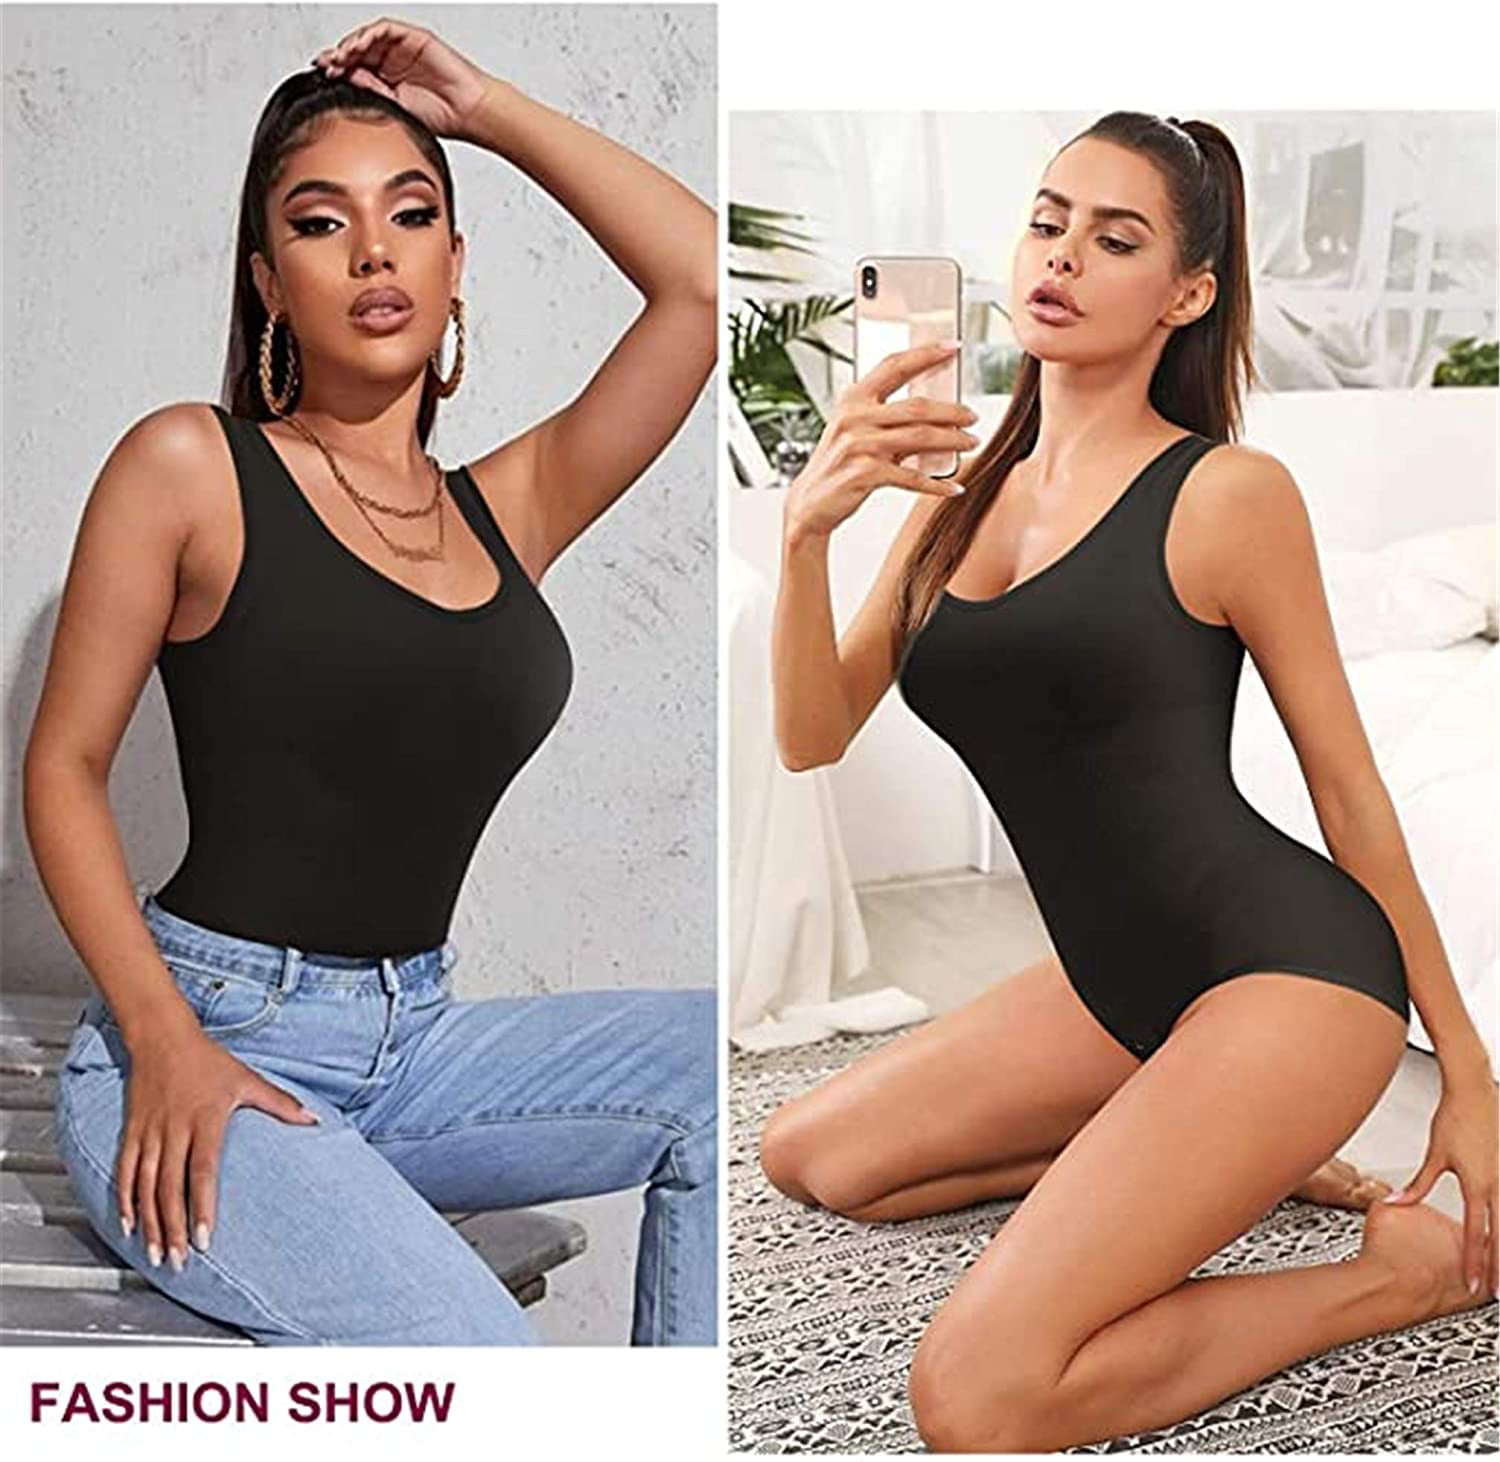 ER Womens Body Shaper Waist Trainer Irisnaya Women Slimming Bodysuits  Bodysuit Vest With Tummy Control And Sexy Lingerie From Huiguorou, $9.7